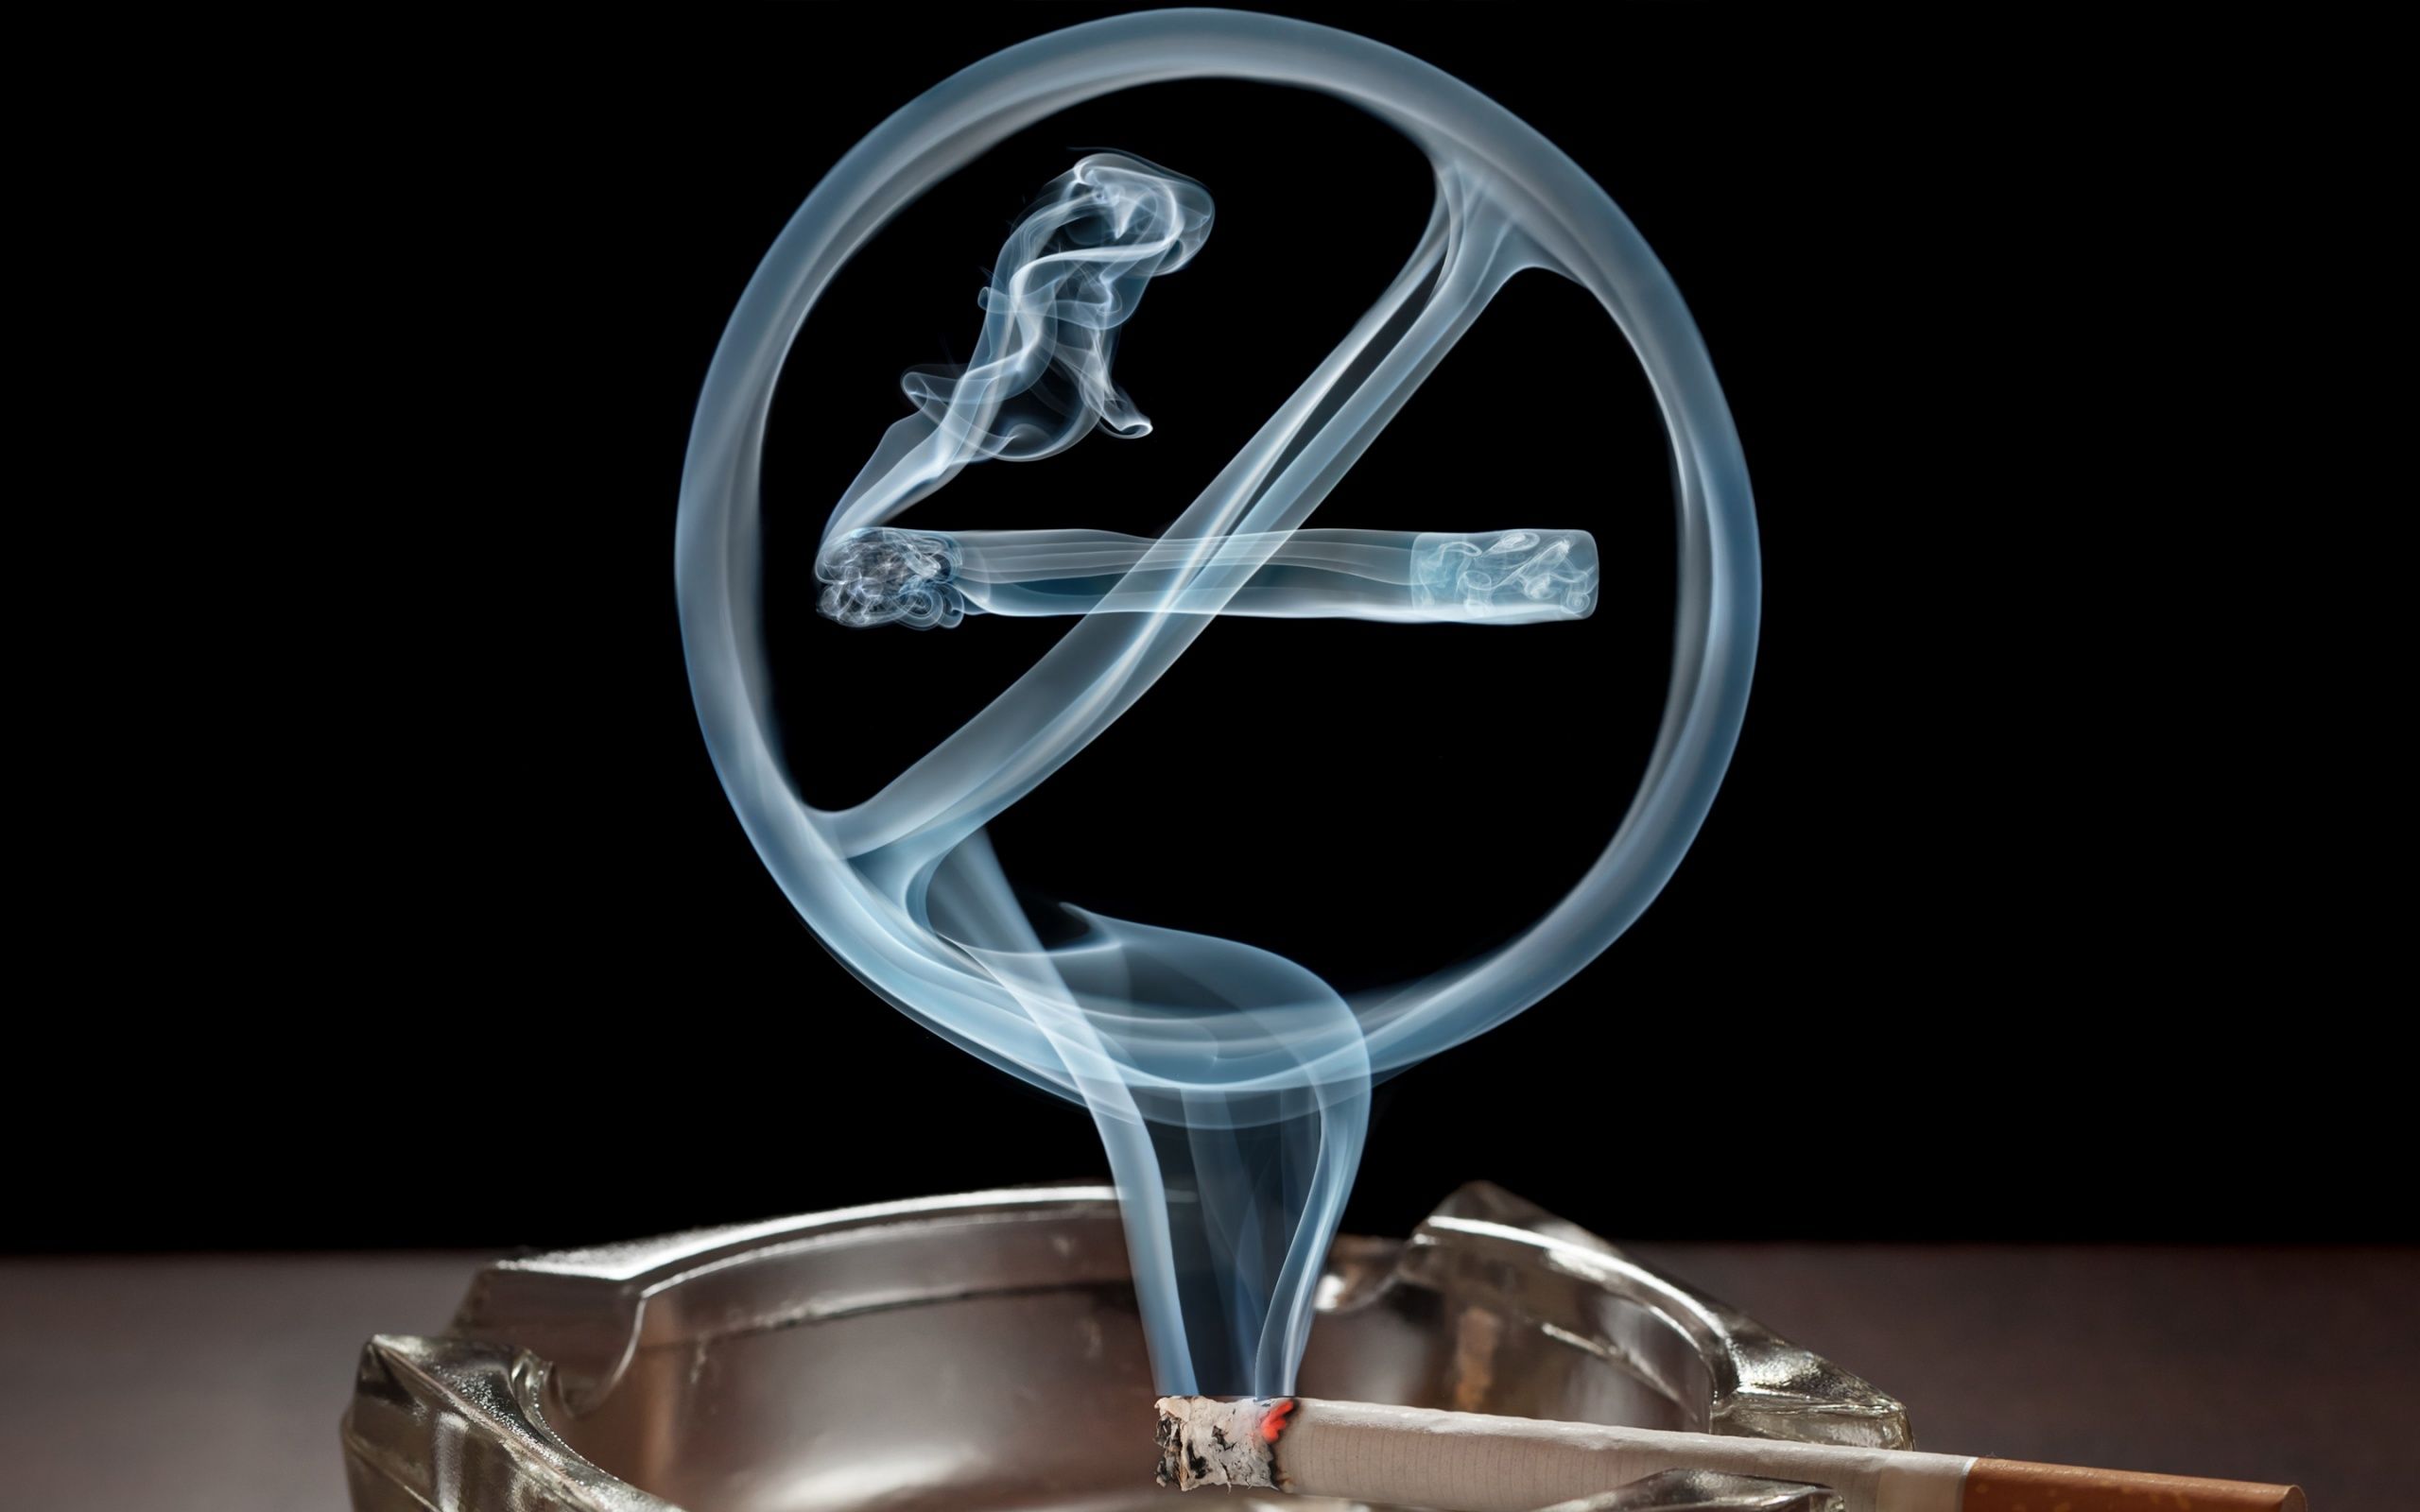 2 No Smoking HD Wallpapers Backgrounds - Wallpaper Abyss